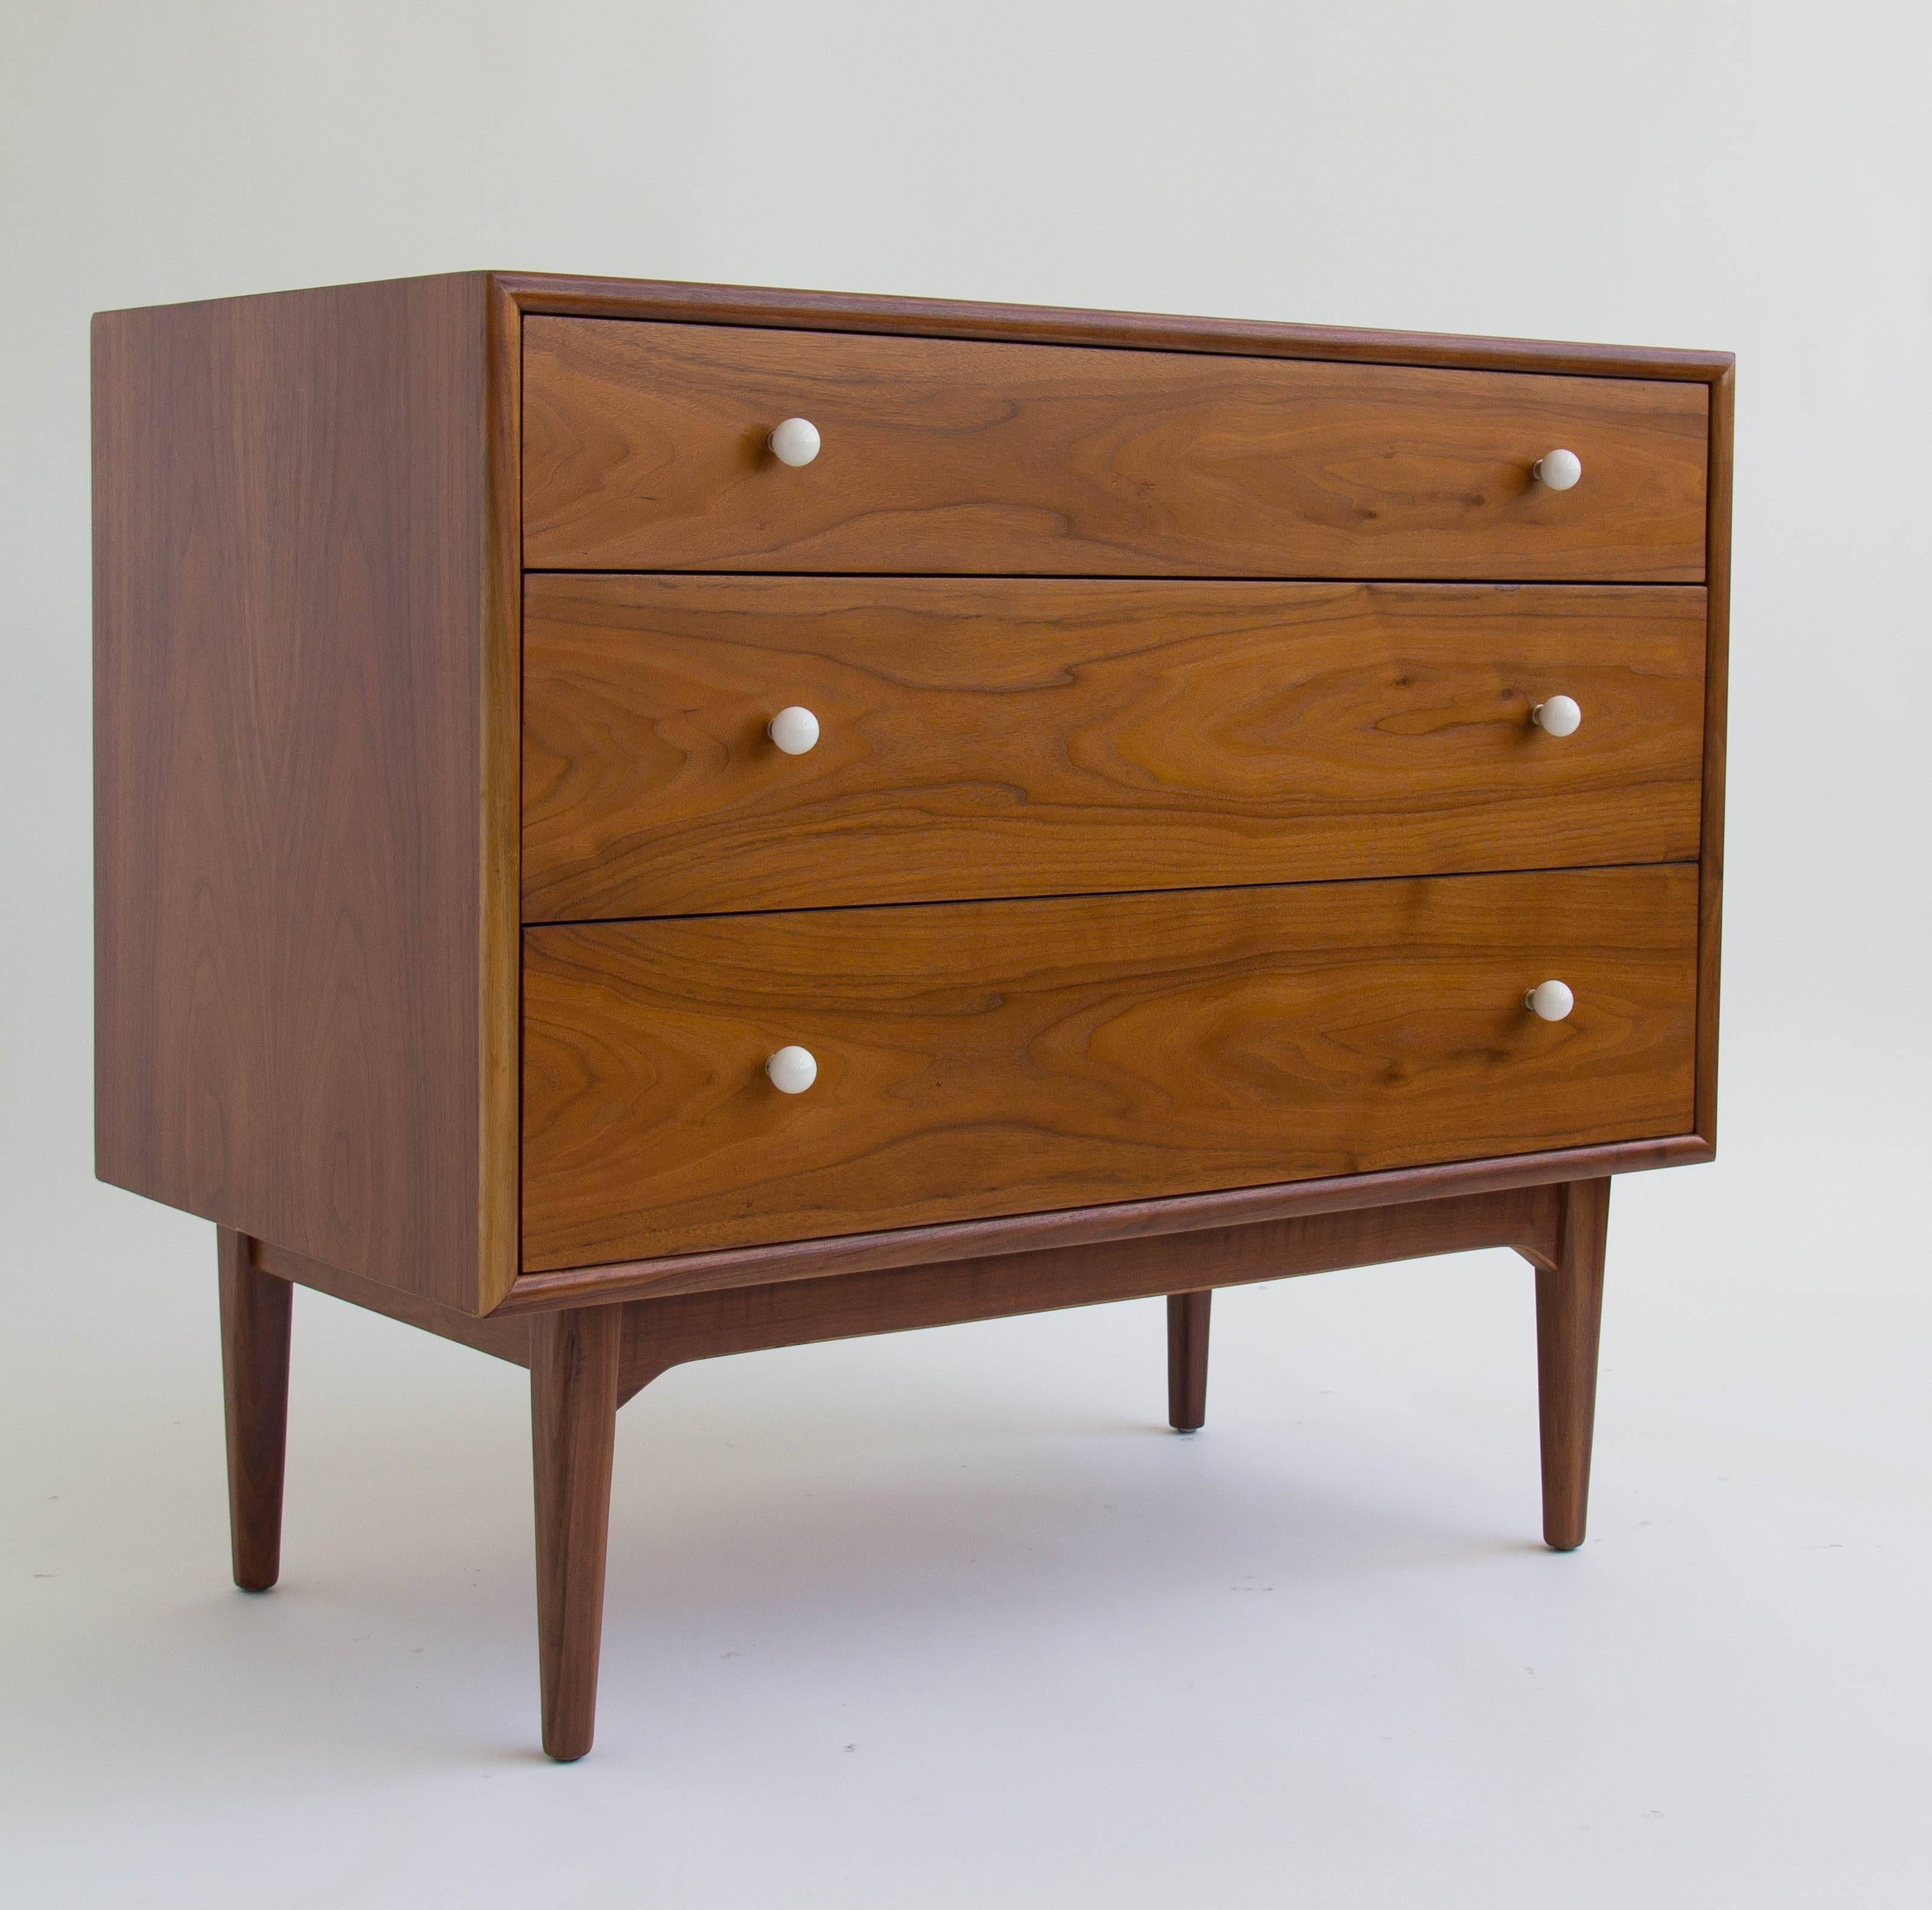 Walnut dresser from Drexel’s popular Declaration collection by Kipp Stewart and Stewart McDougall. This example has a walnut case holding three drawers with original white ceramic knobs on brass spacers. Upper drawer has the Drexel manufacturer’s